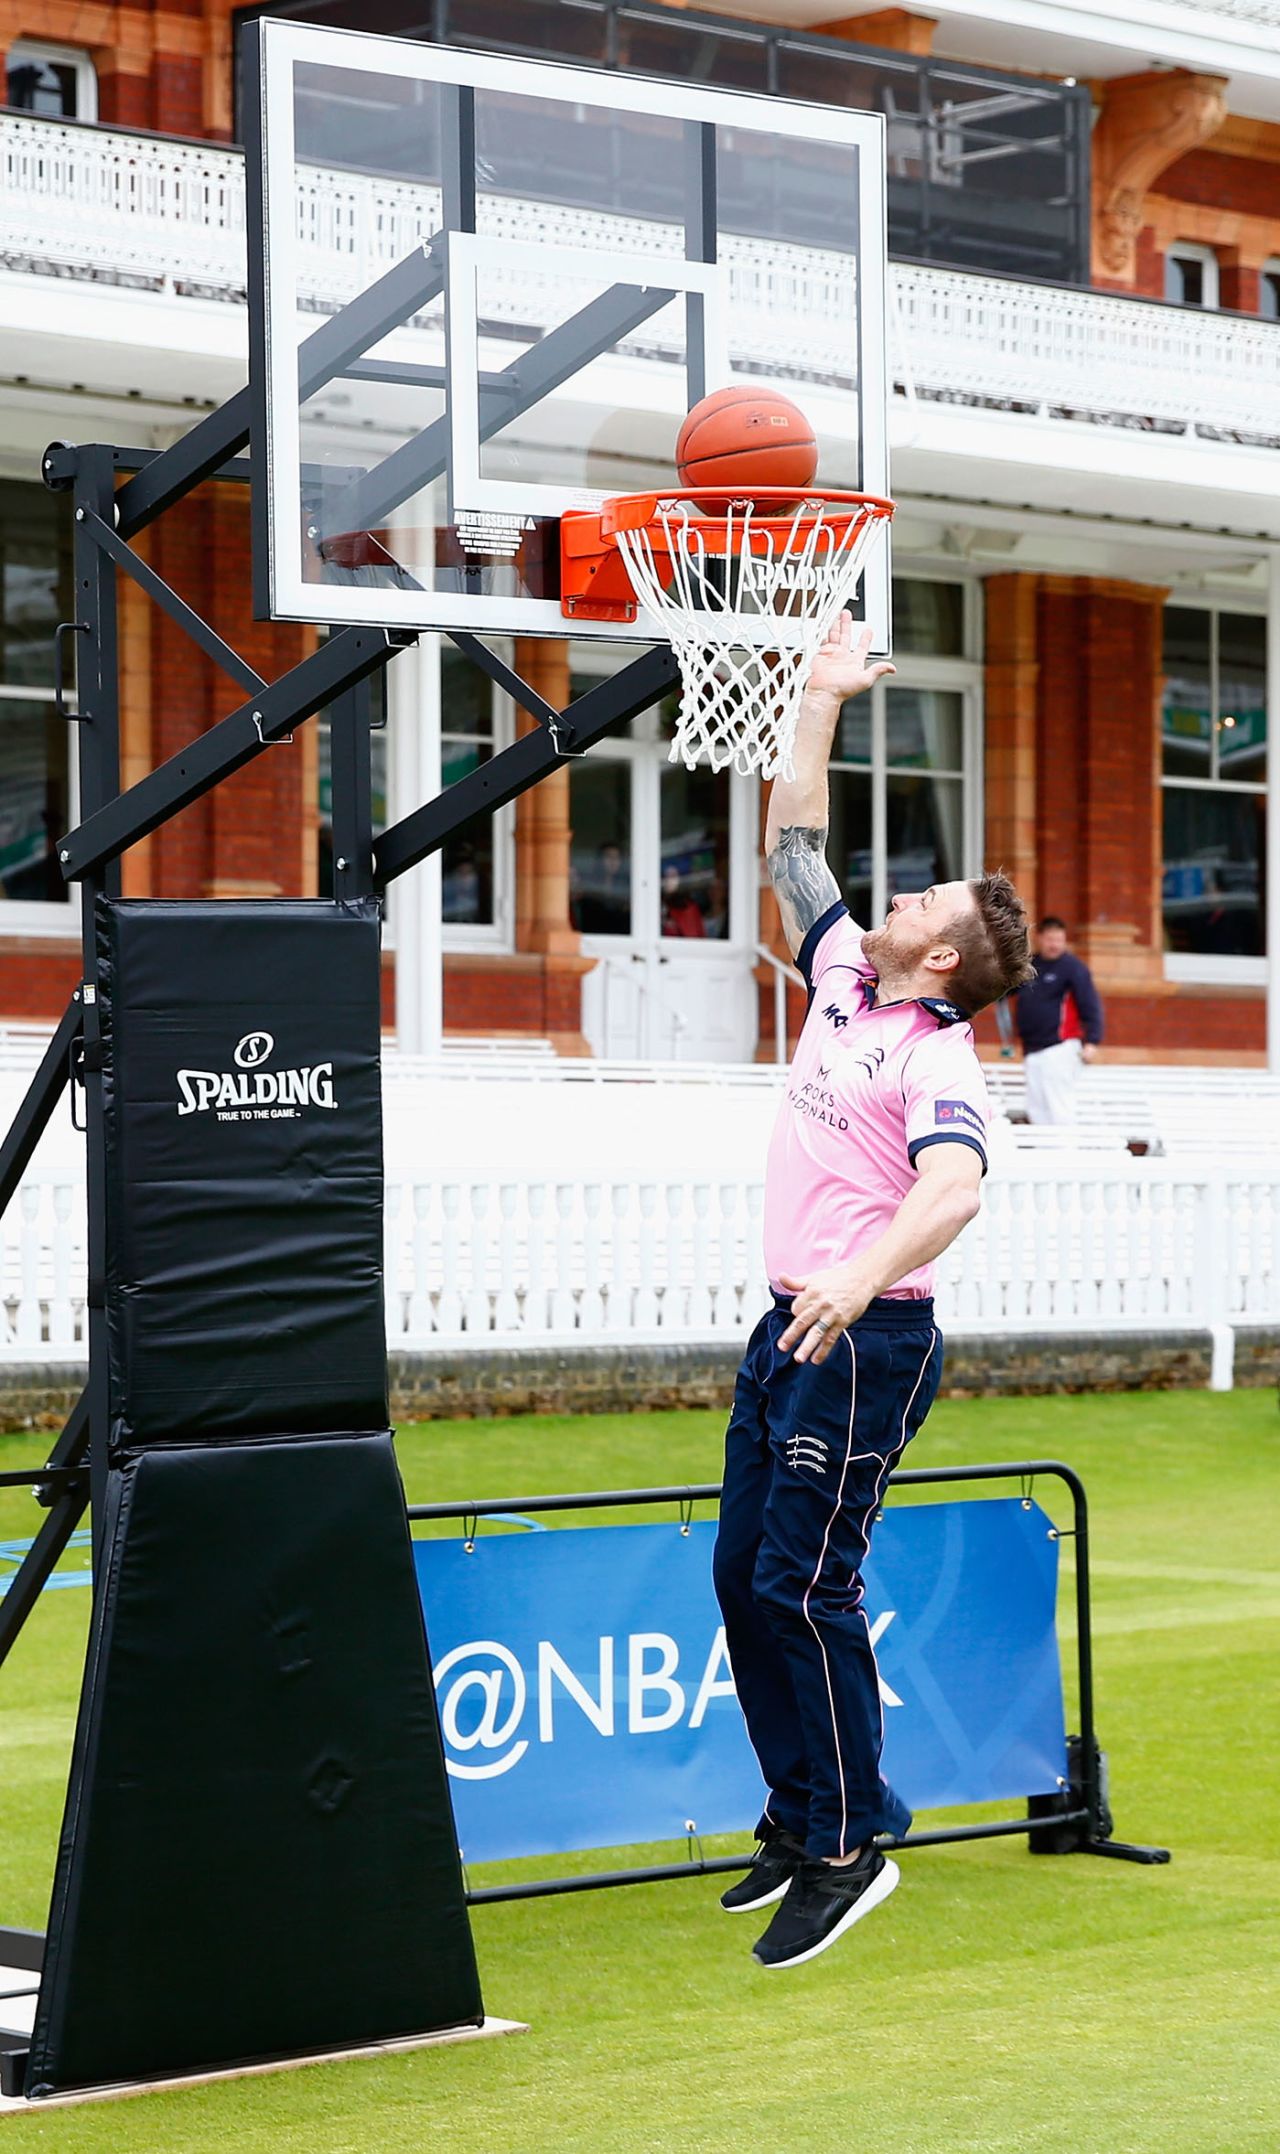 Brendon McCullum plays basketball at Lord's during a promotional event, June 2, 2016